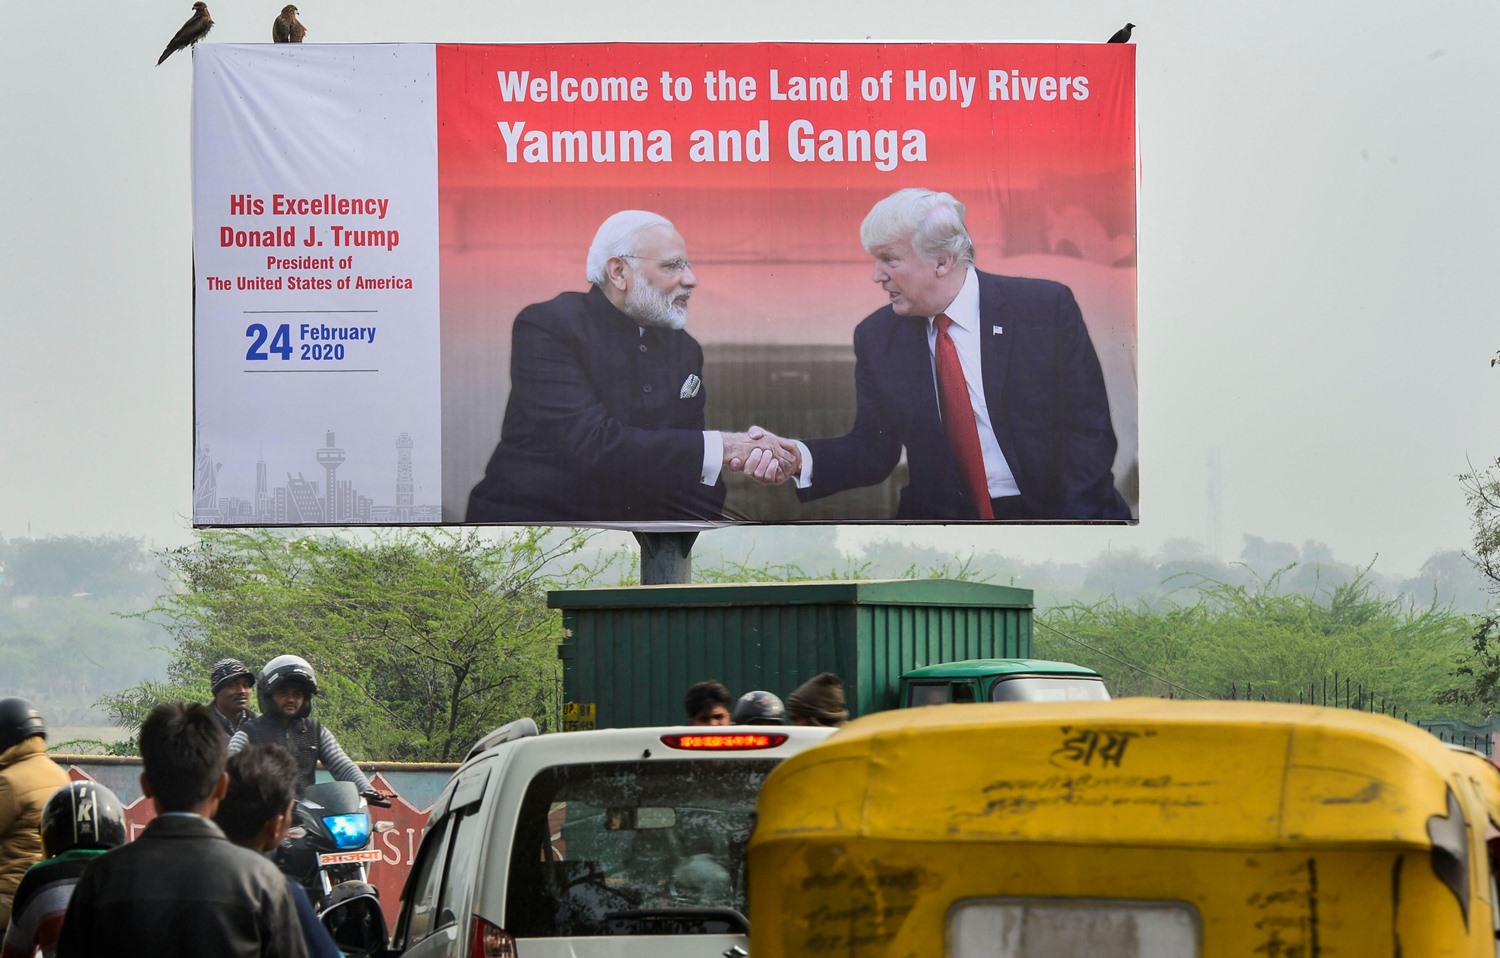 Agra: A billboard with the pictures of Prime Minister Narendra Modi and U. S. President Donald Trump put up along side a road, ahead of Trump’s visit to Agra, Saturday, Feb. 22, 2020. (PTI Photo/ Kamal Kishore) (PTI2 22 2020 000034B)